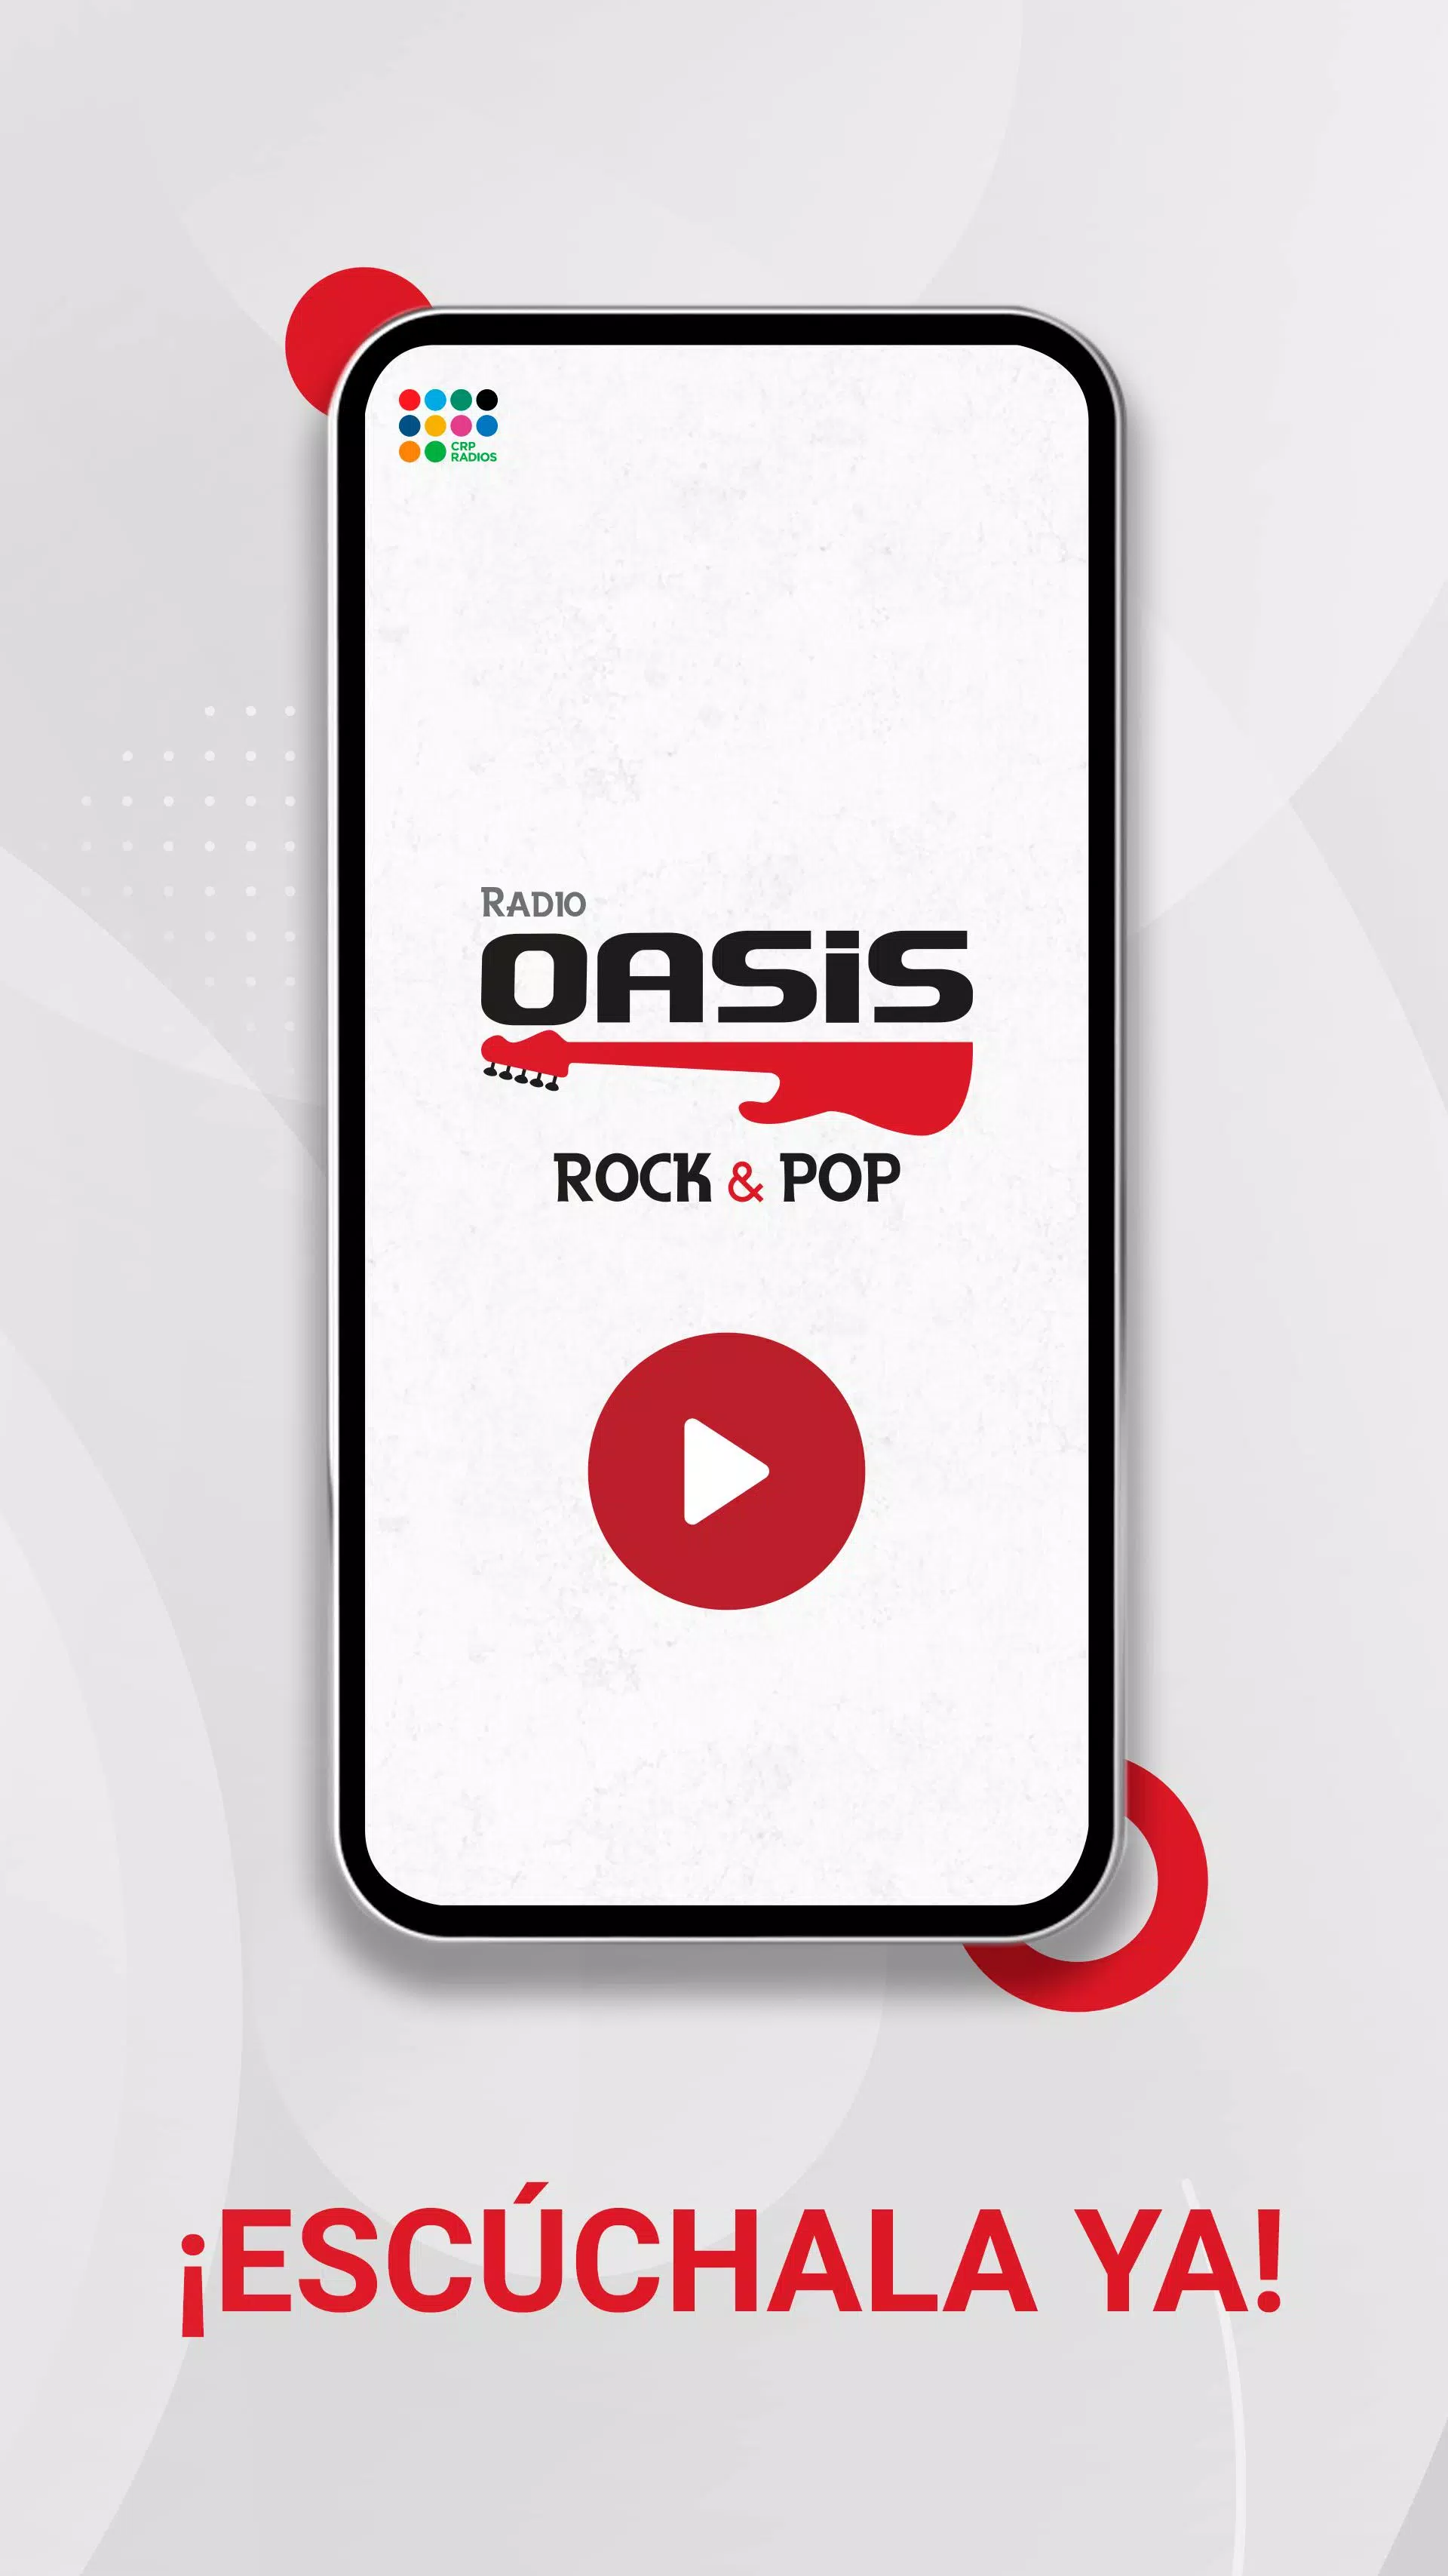 Radio Oasis for Android - APK Download